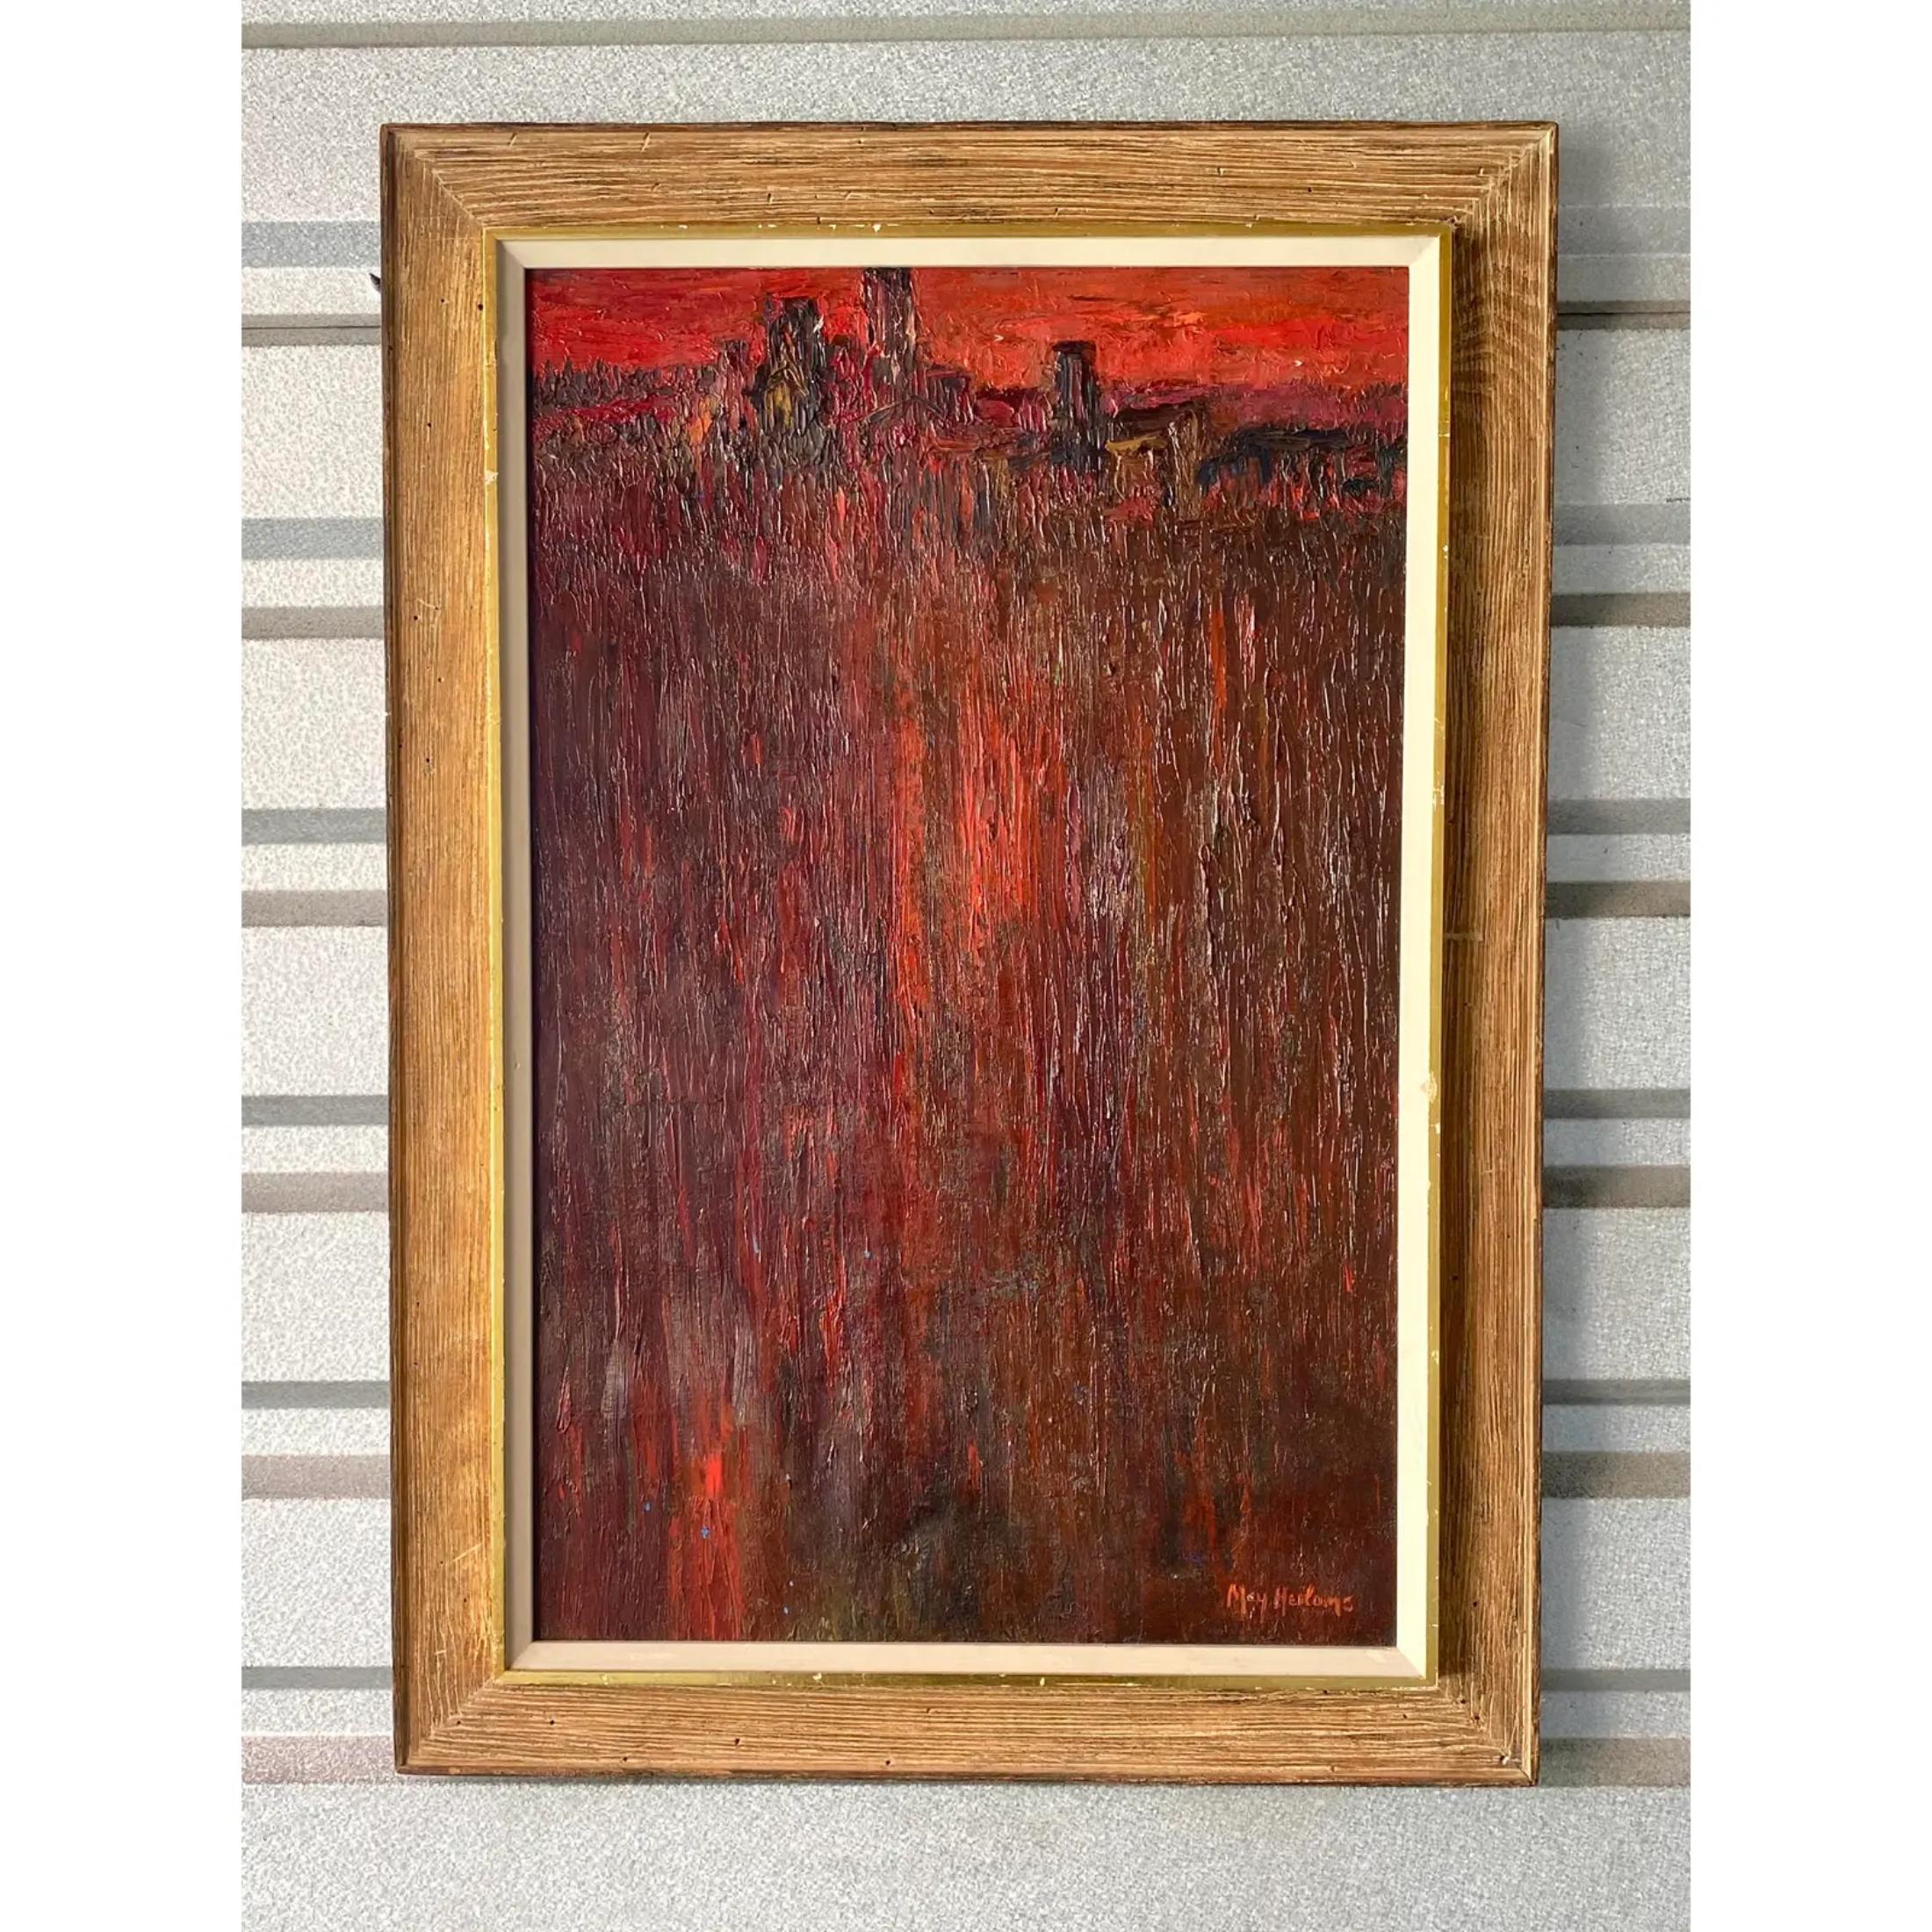 Gorgeous Midcentury original oil painting. Signed by the artist May Heiloms. Gorgeous abstract of a city skyline in deep reds and maroons. Signed in the bottom right. Acquired from a Miami estate.